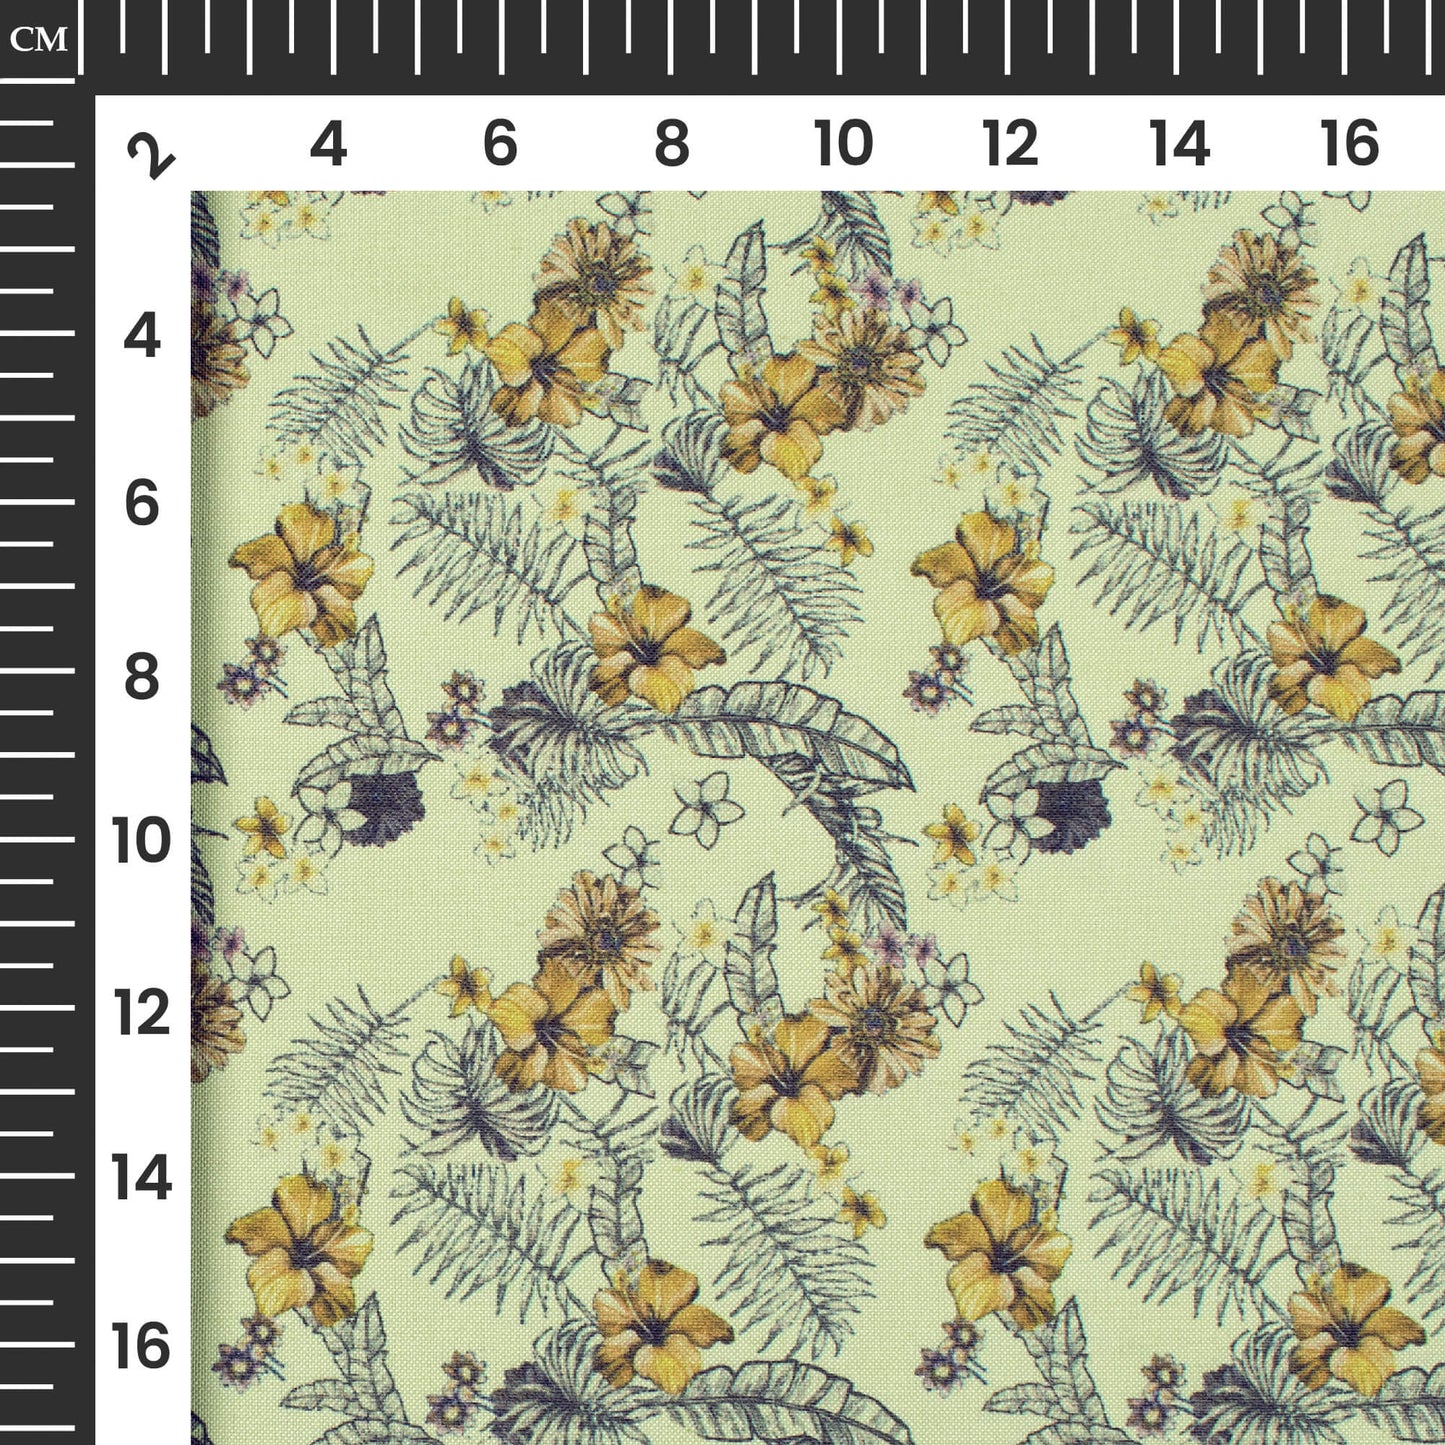 Laurel Green Floral Printed Exclusive Shirting Fabric